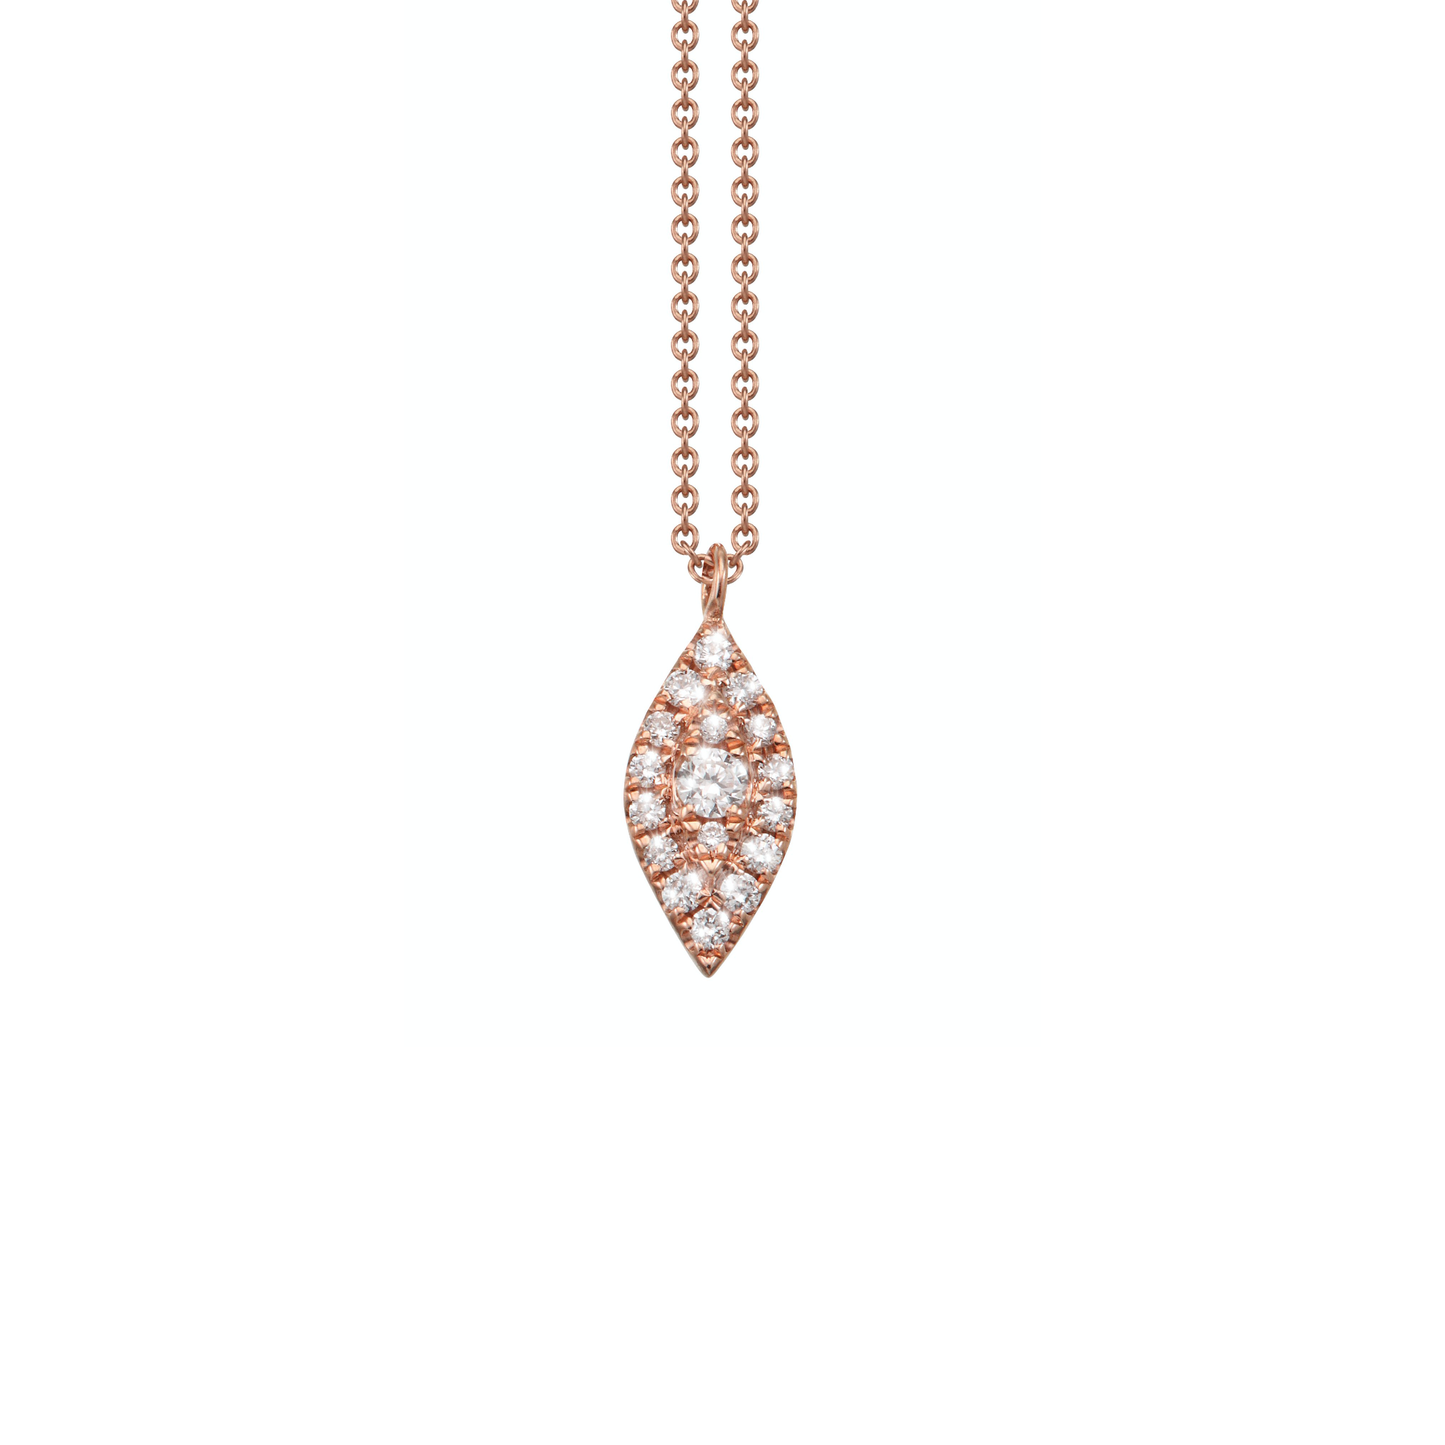 Oliver Heemeyer Mia diamond pendant made of 18k rose gold crafted with a larger centered diamond surrounded by 17 smaller diamonds.